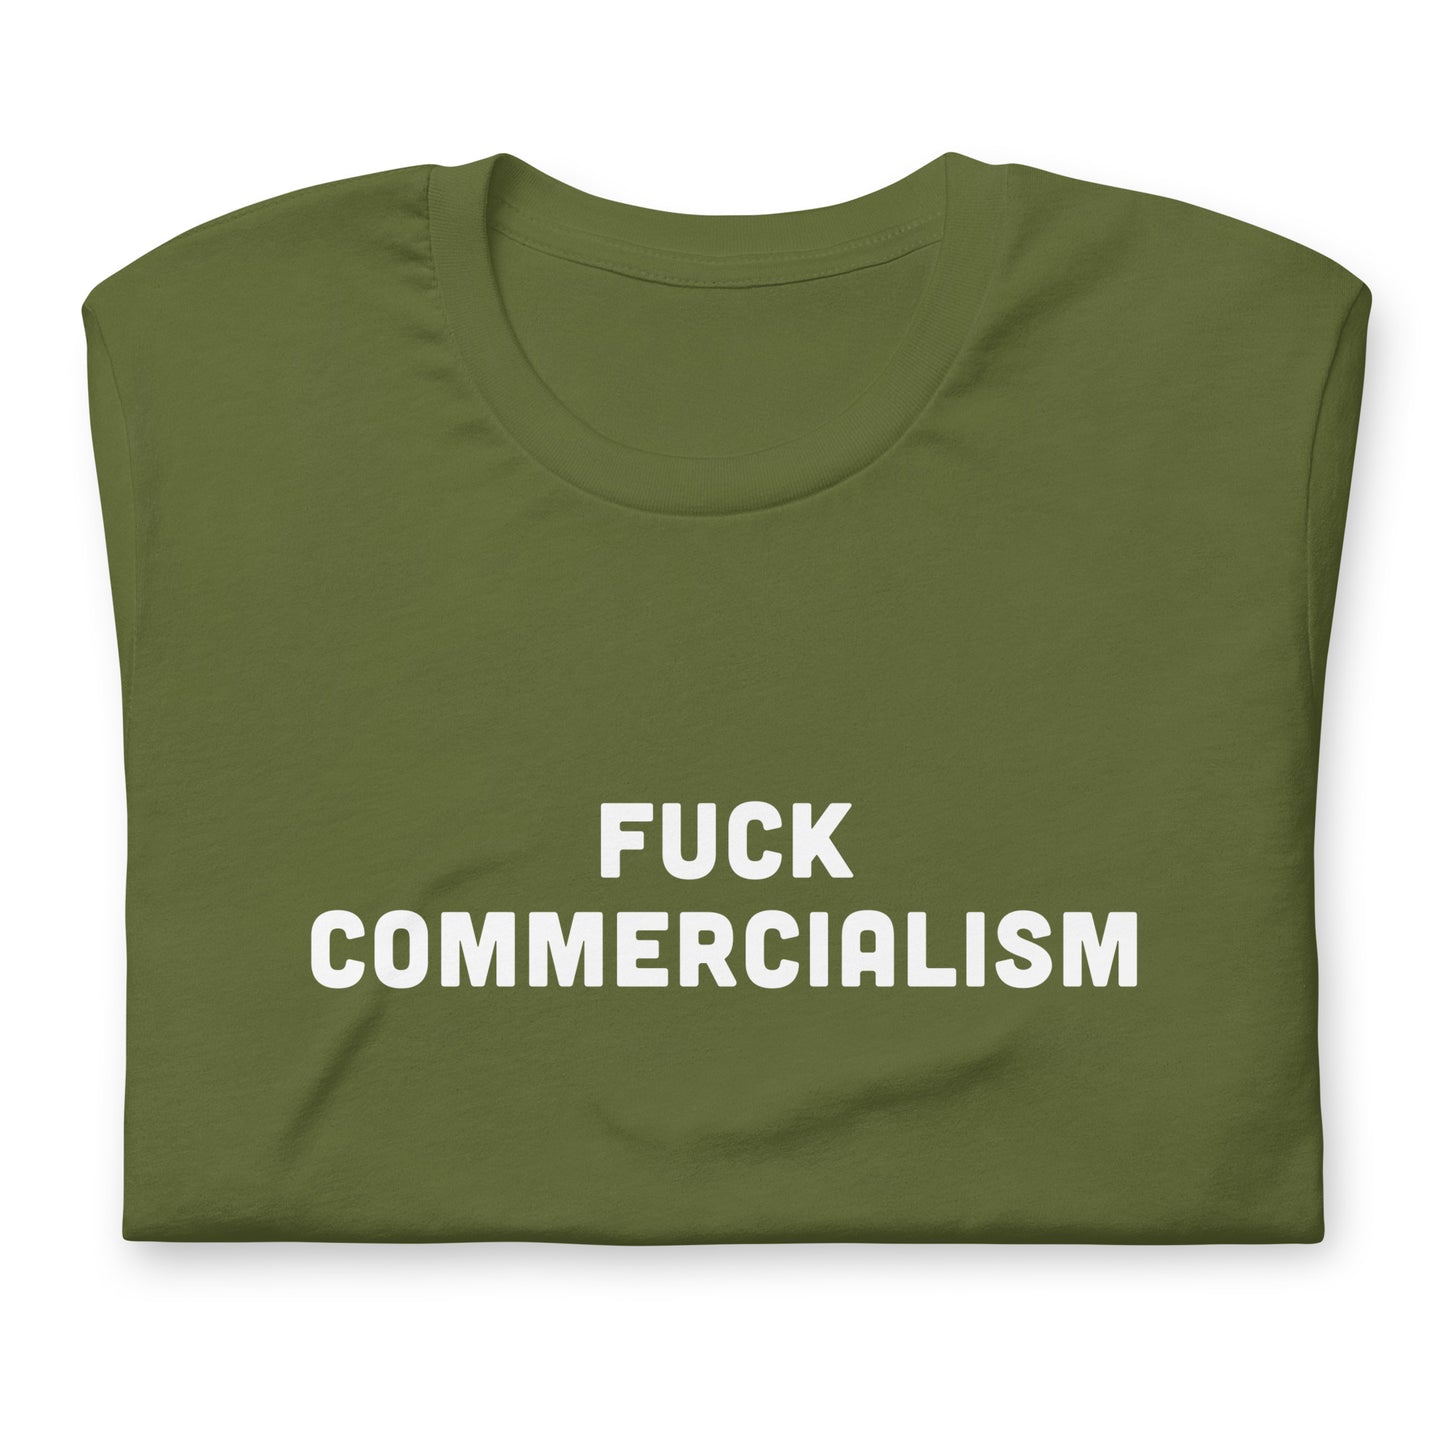 Fuck Commercialism T-Shirt Size S Color Navy